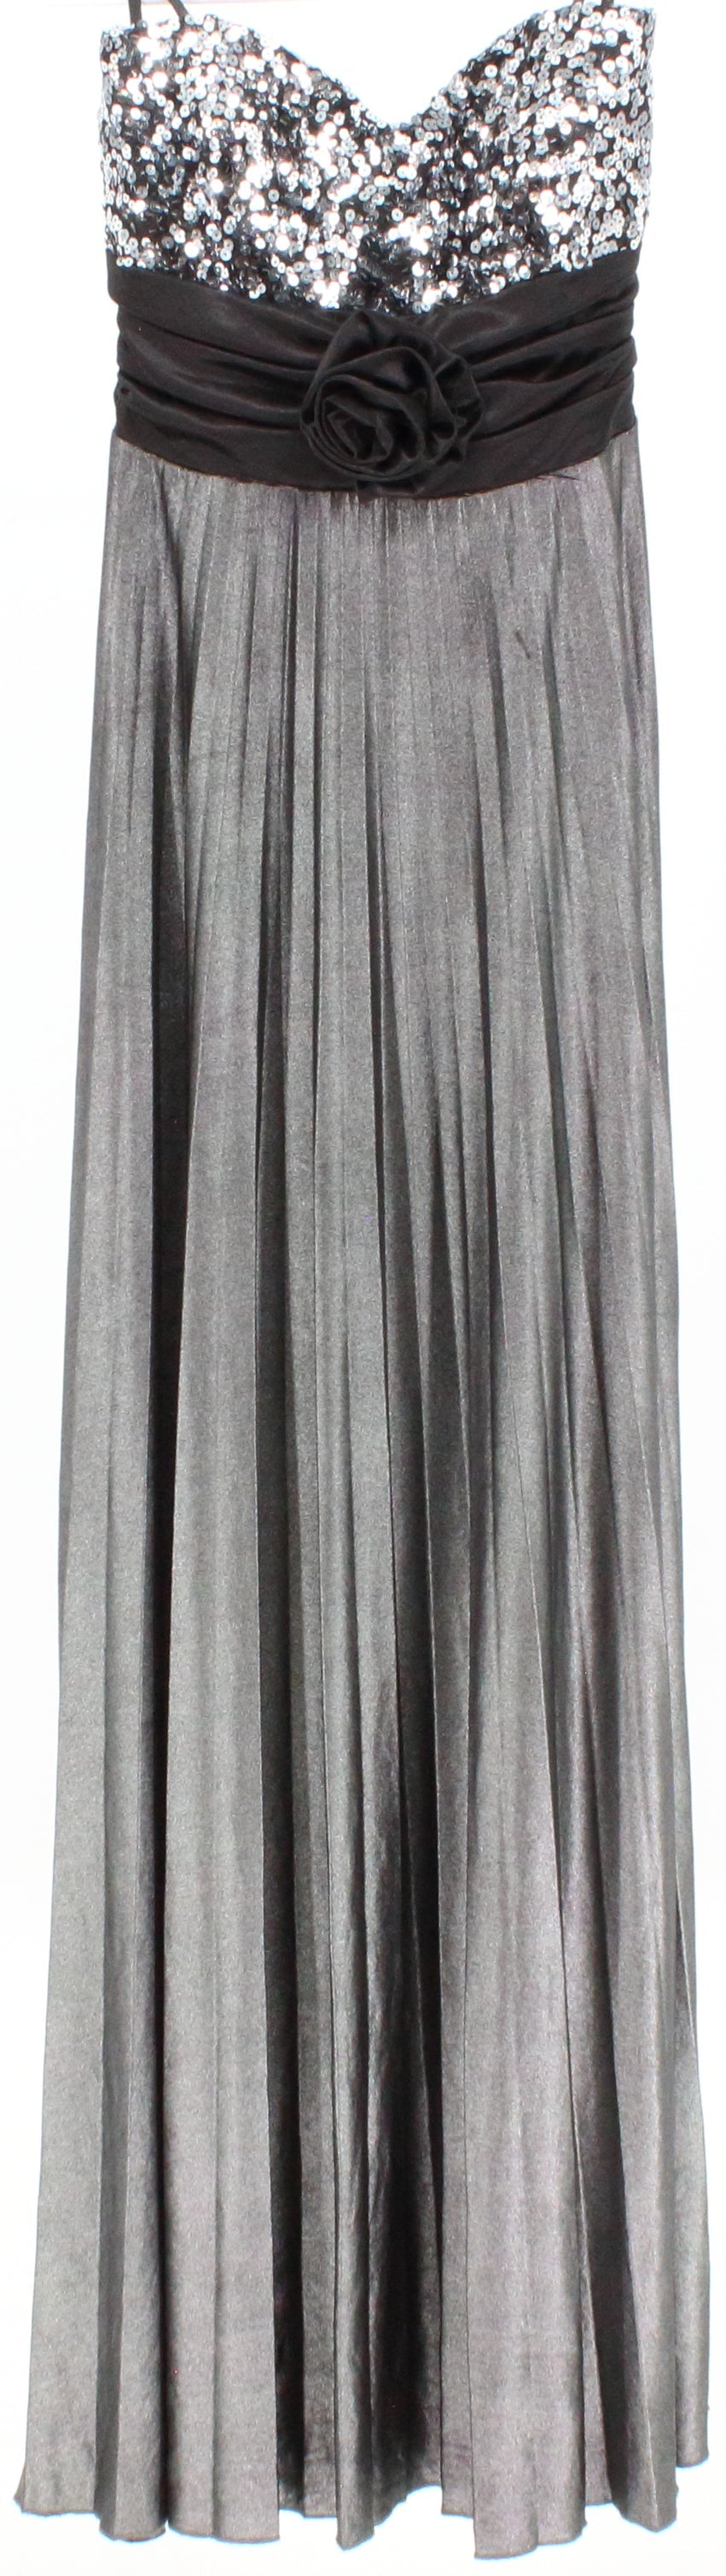 Speechless Shiny Grey Black and Silver Sequins Long Strapless Dress